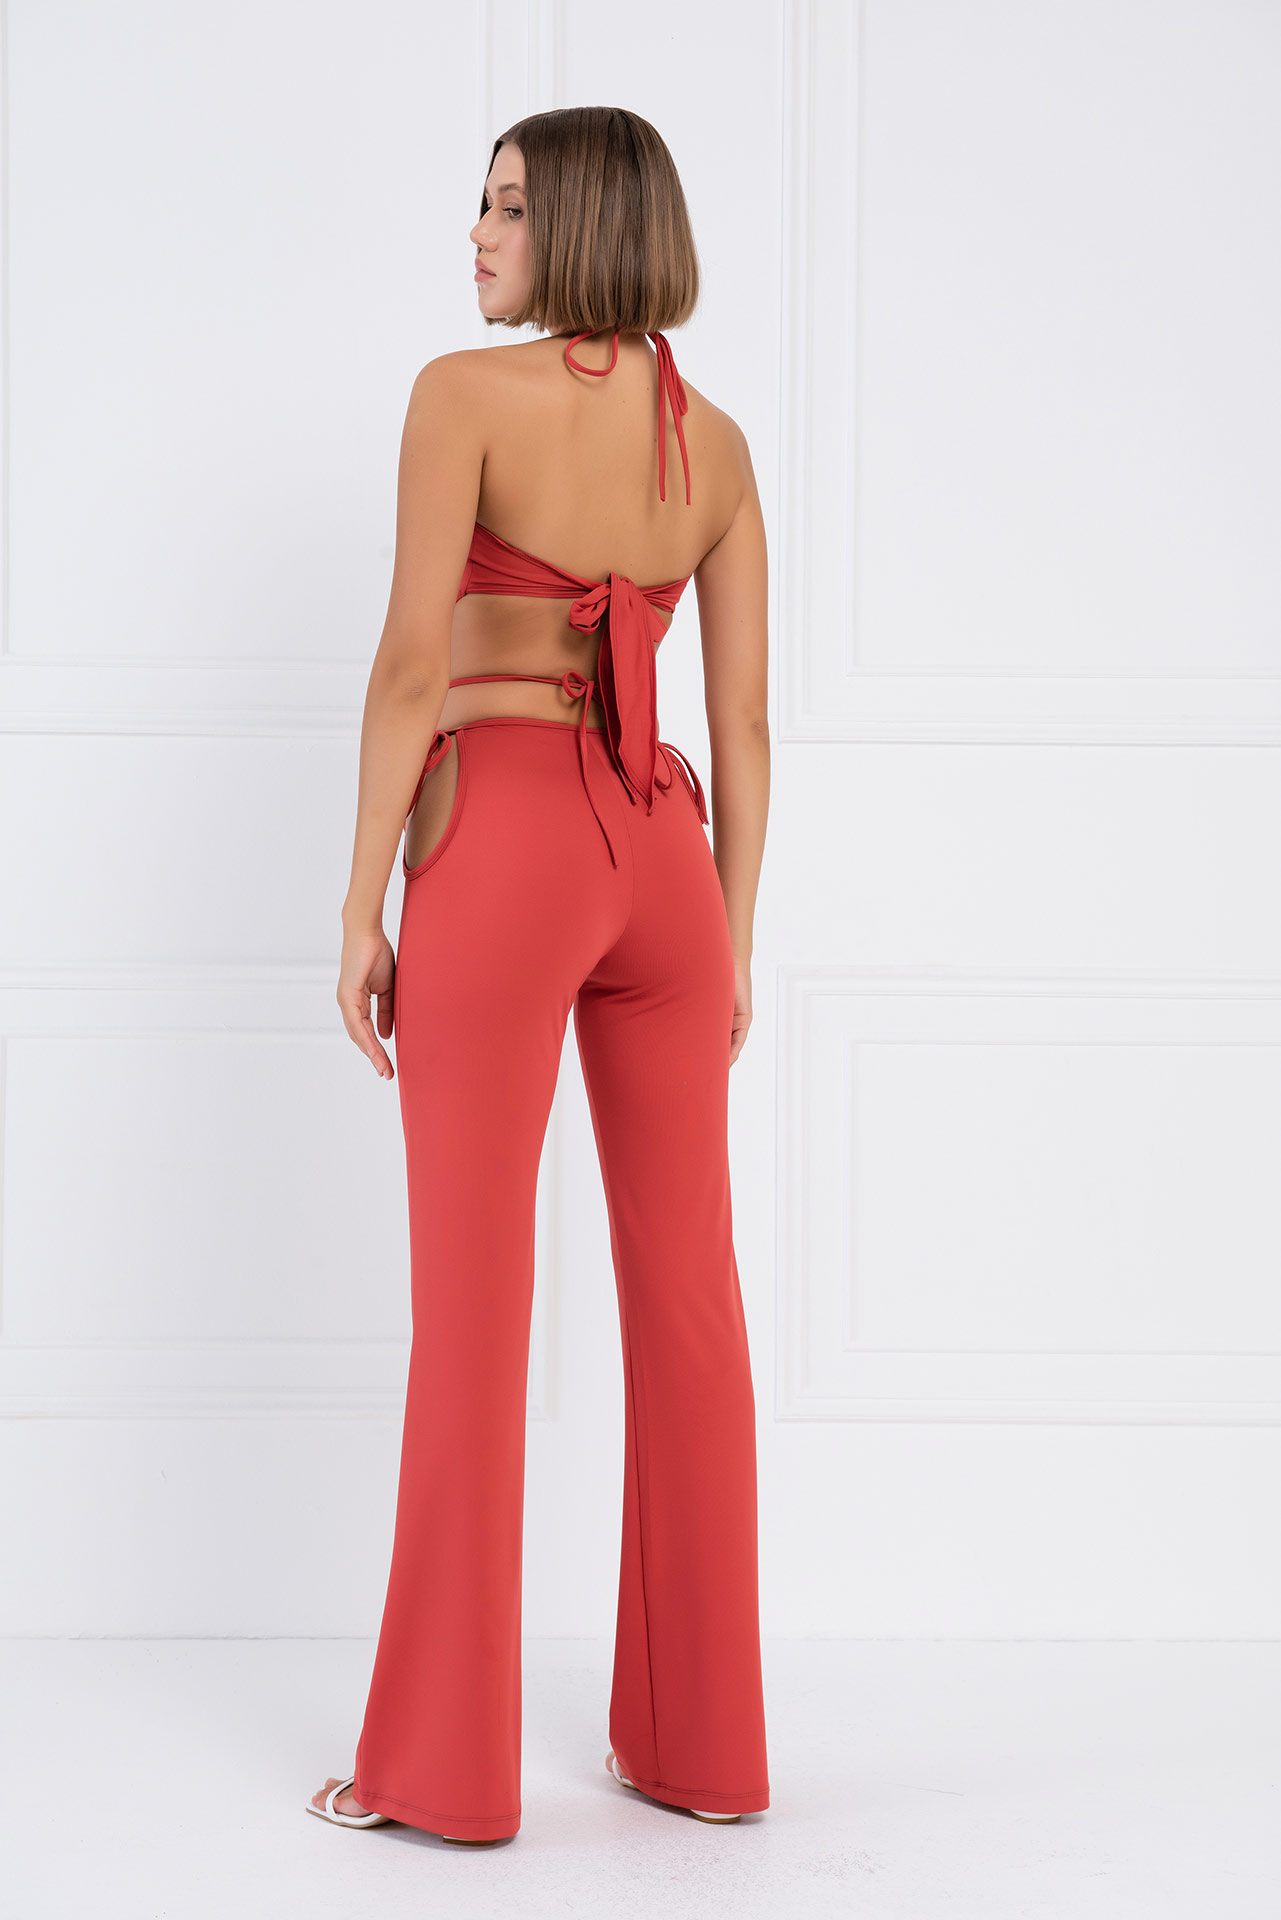 Ginger Strappy Crop Cami & Cut Out Pants Set